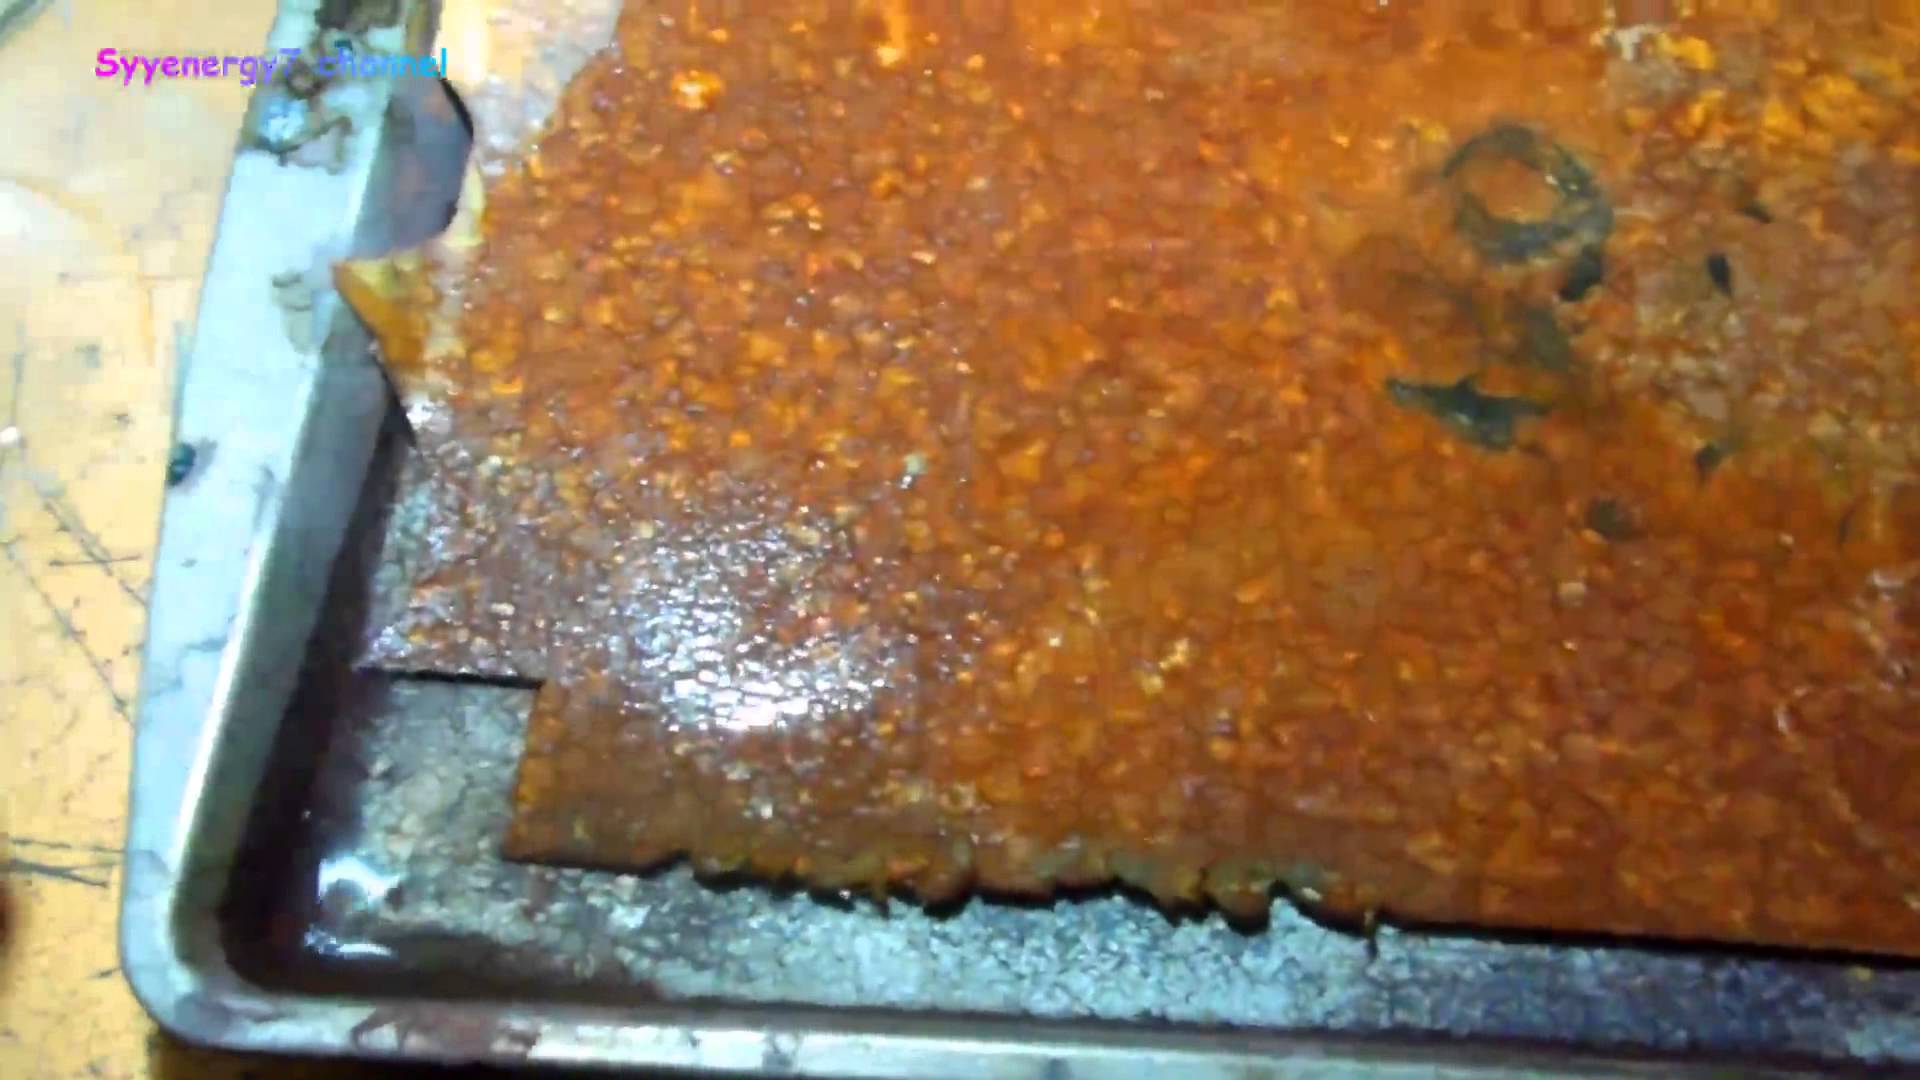 VINEGAR Cleans Heavily Rusted Metal FAST - YouTube